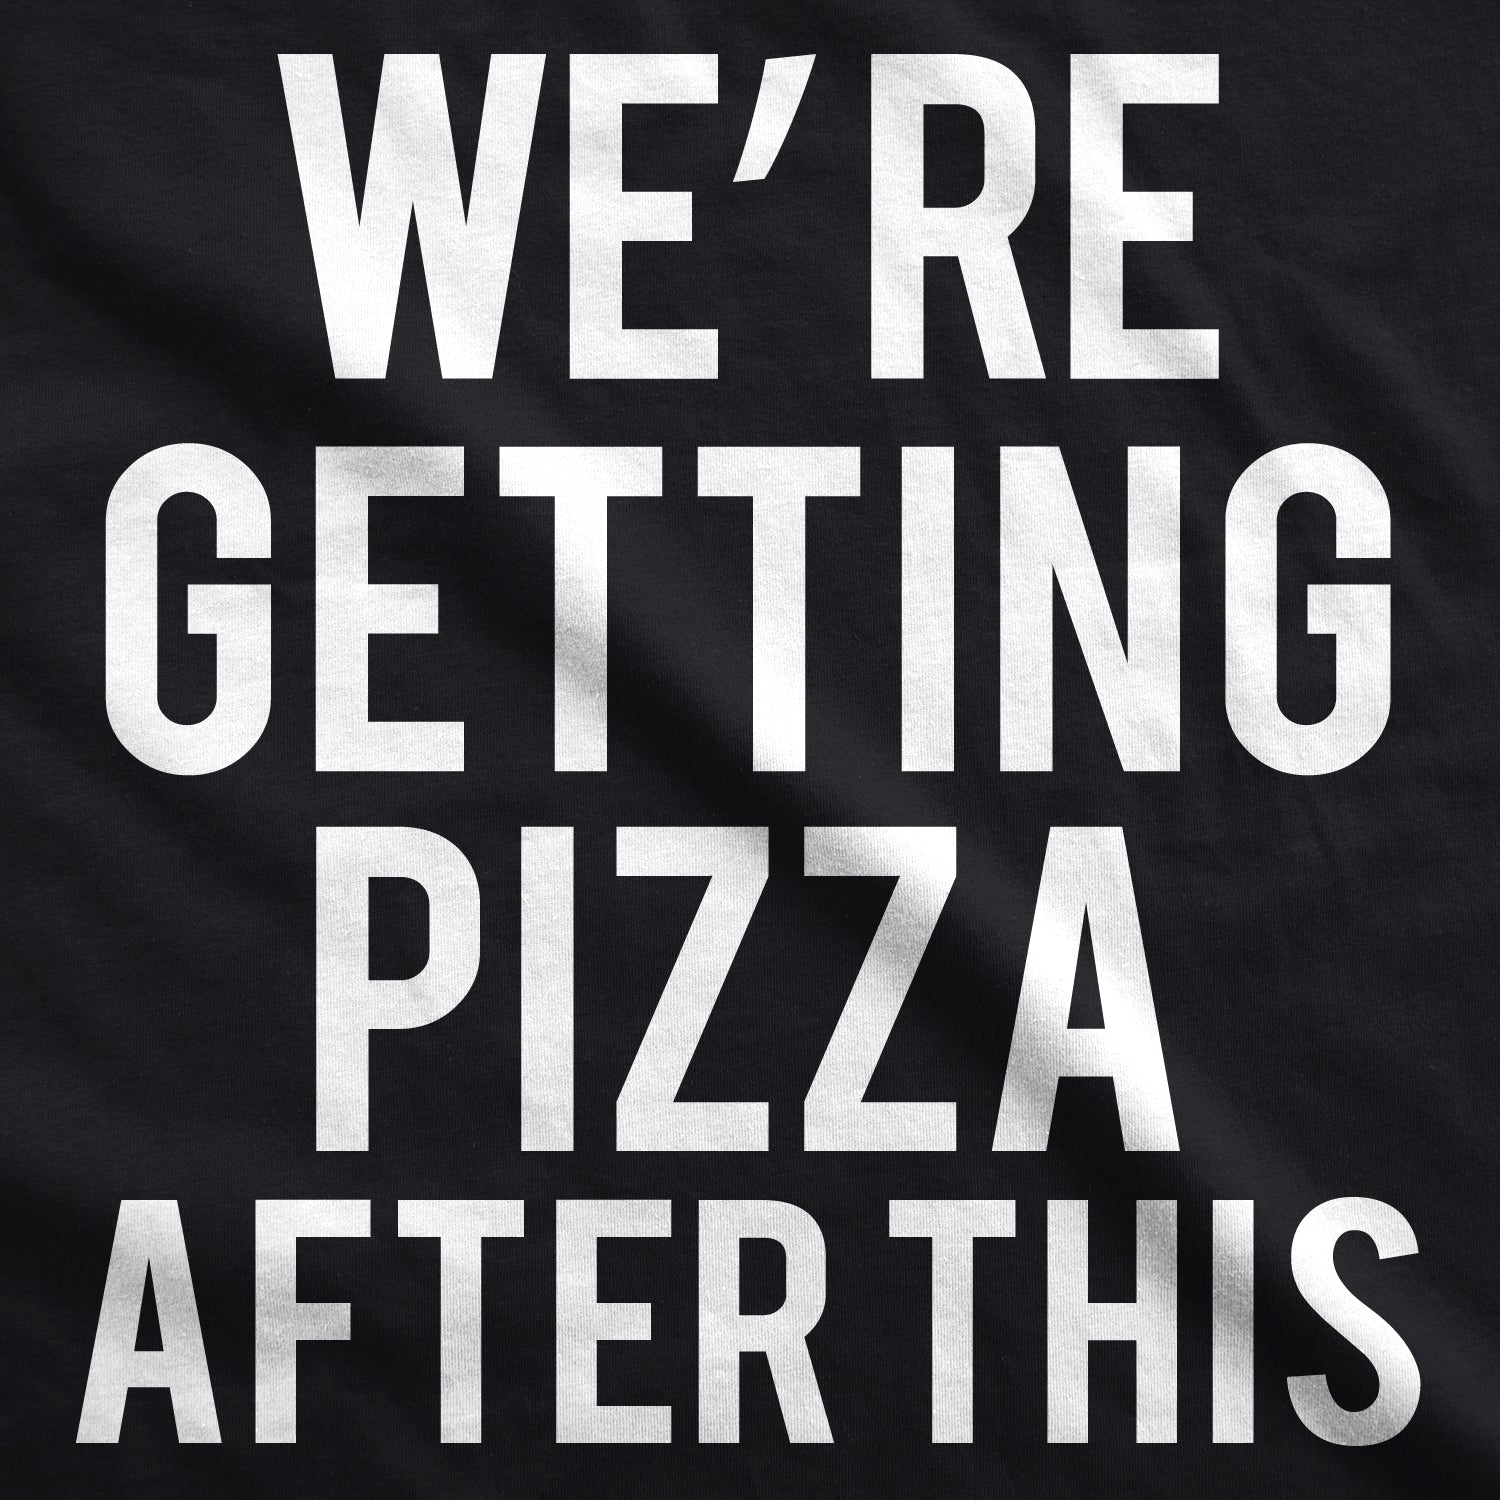 Funny Black We're Getting Pizza After This Mens Tank Top Nerdy Fitness Food Tee